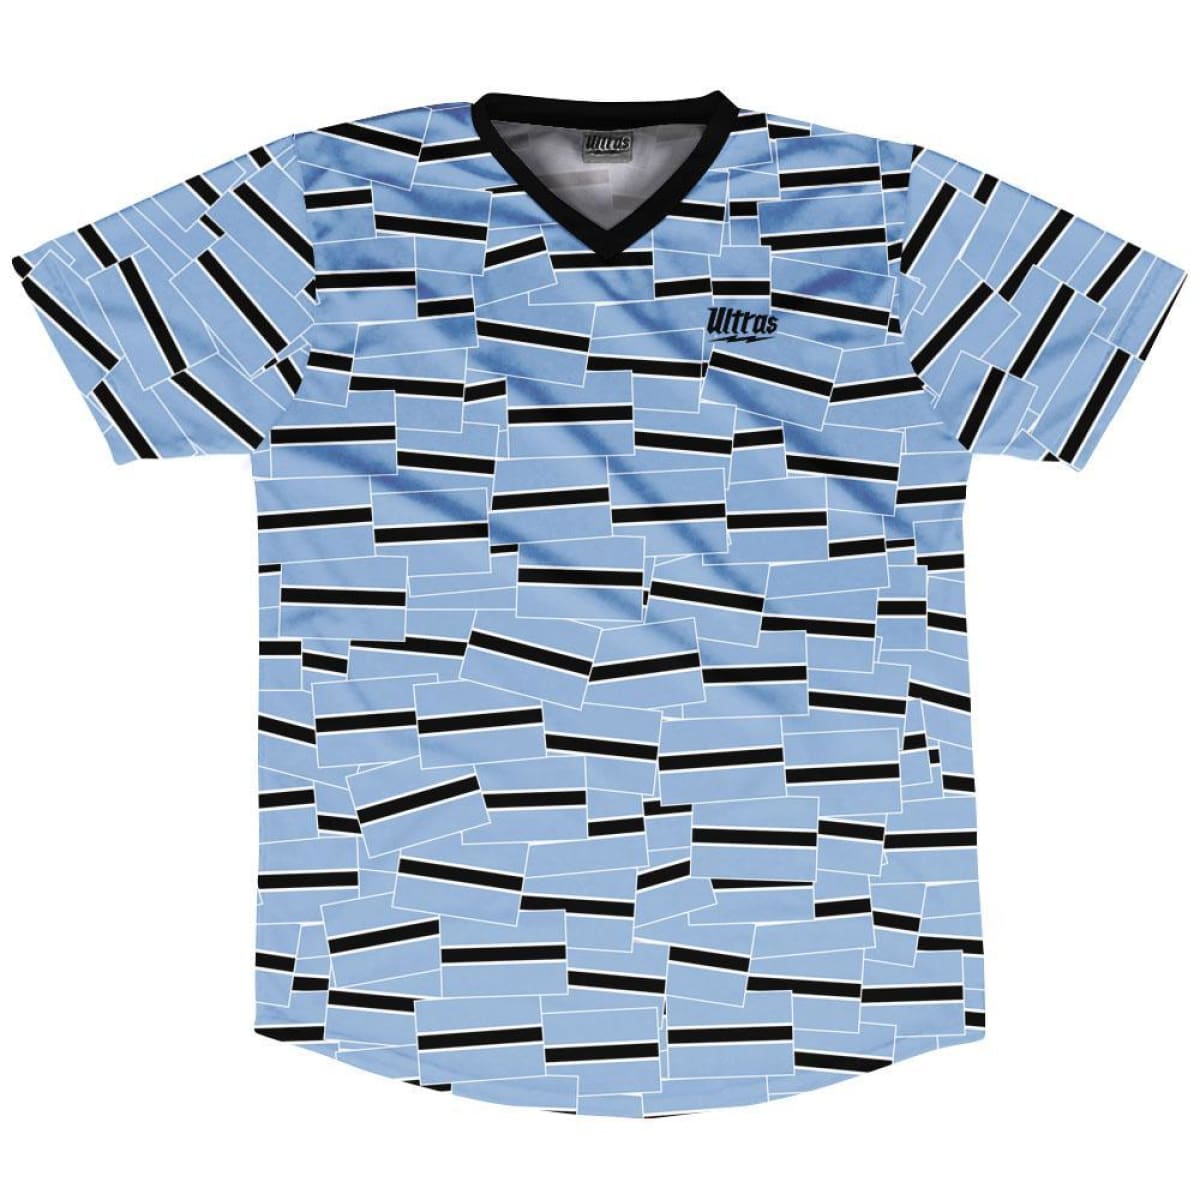 light blue and white soccer jersey